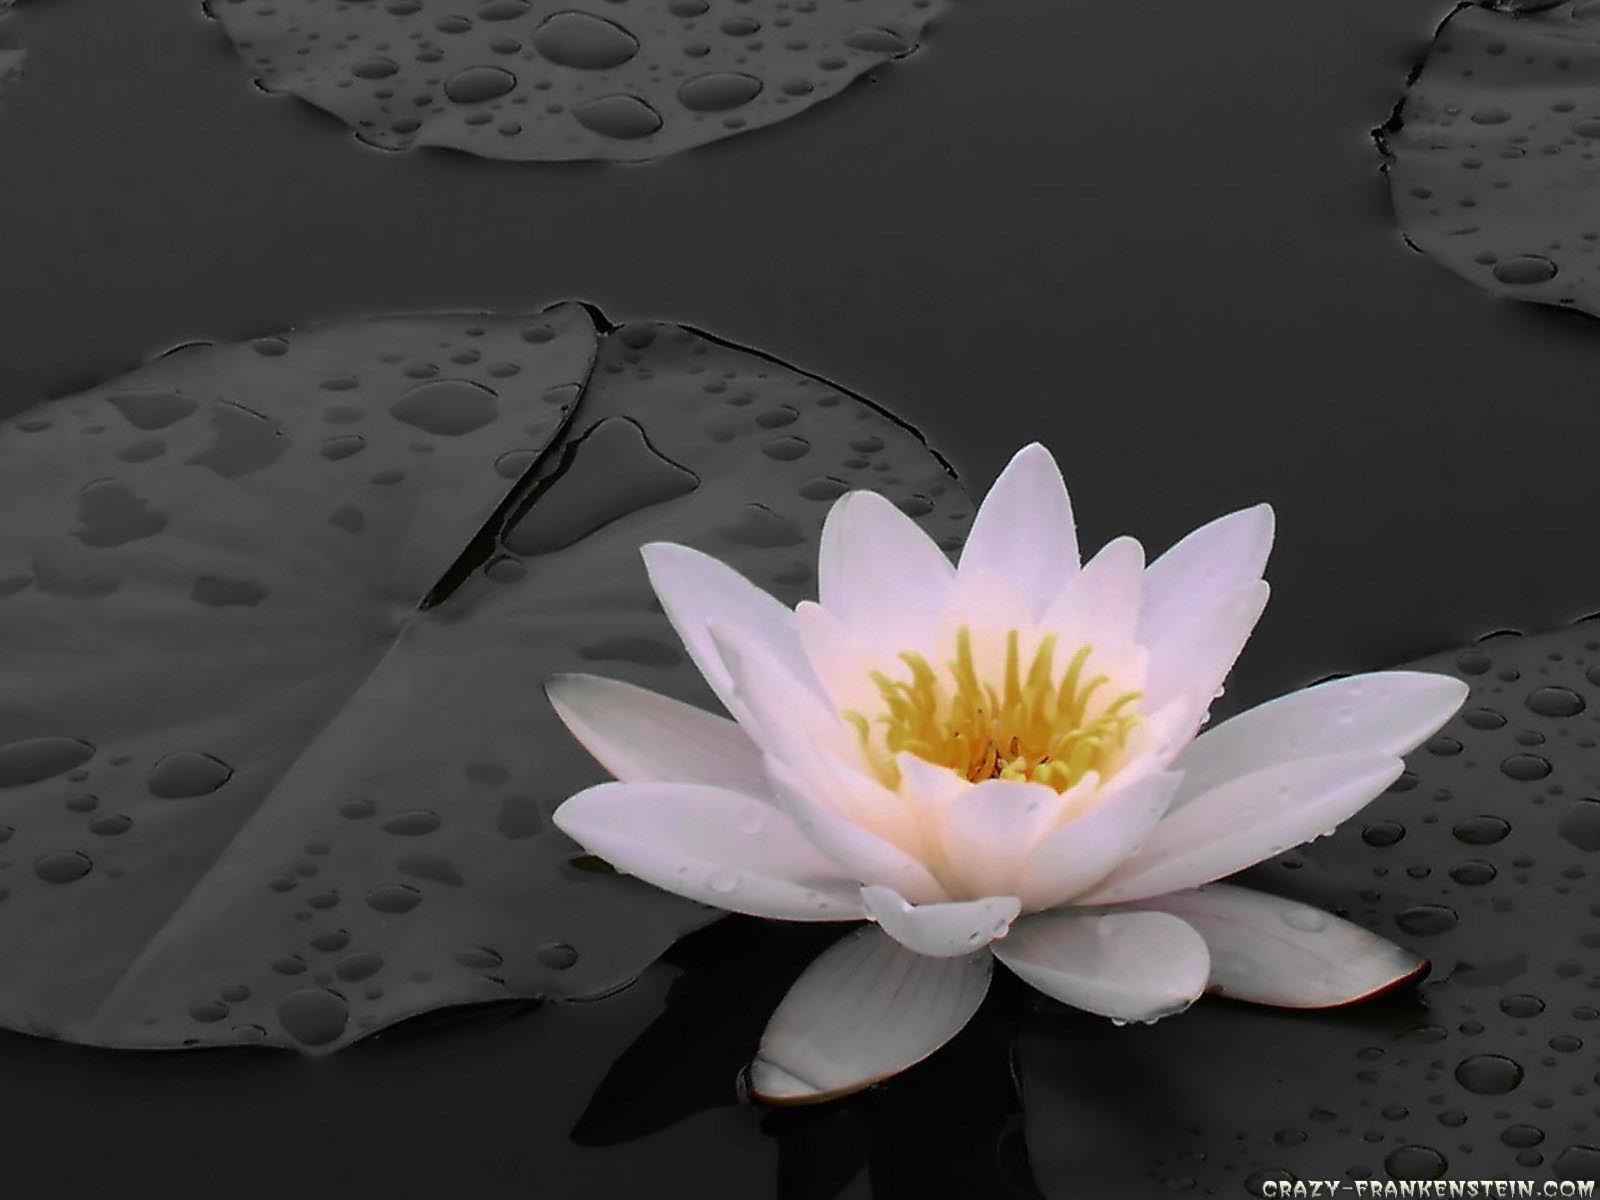 White+Lily+Flowers+Wallpapers+2.jpg